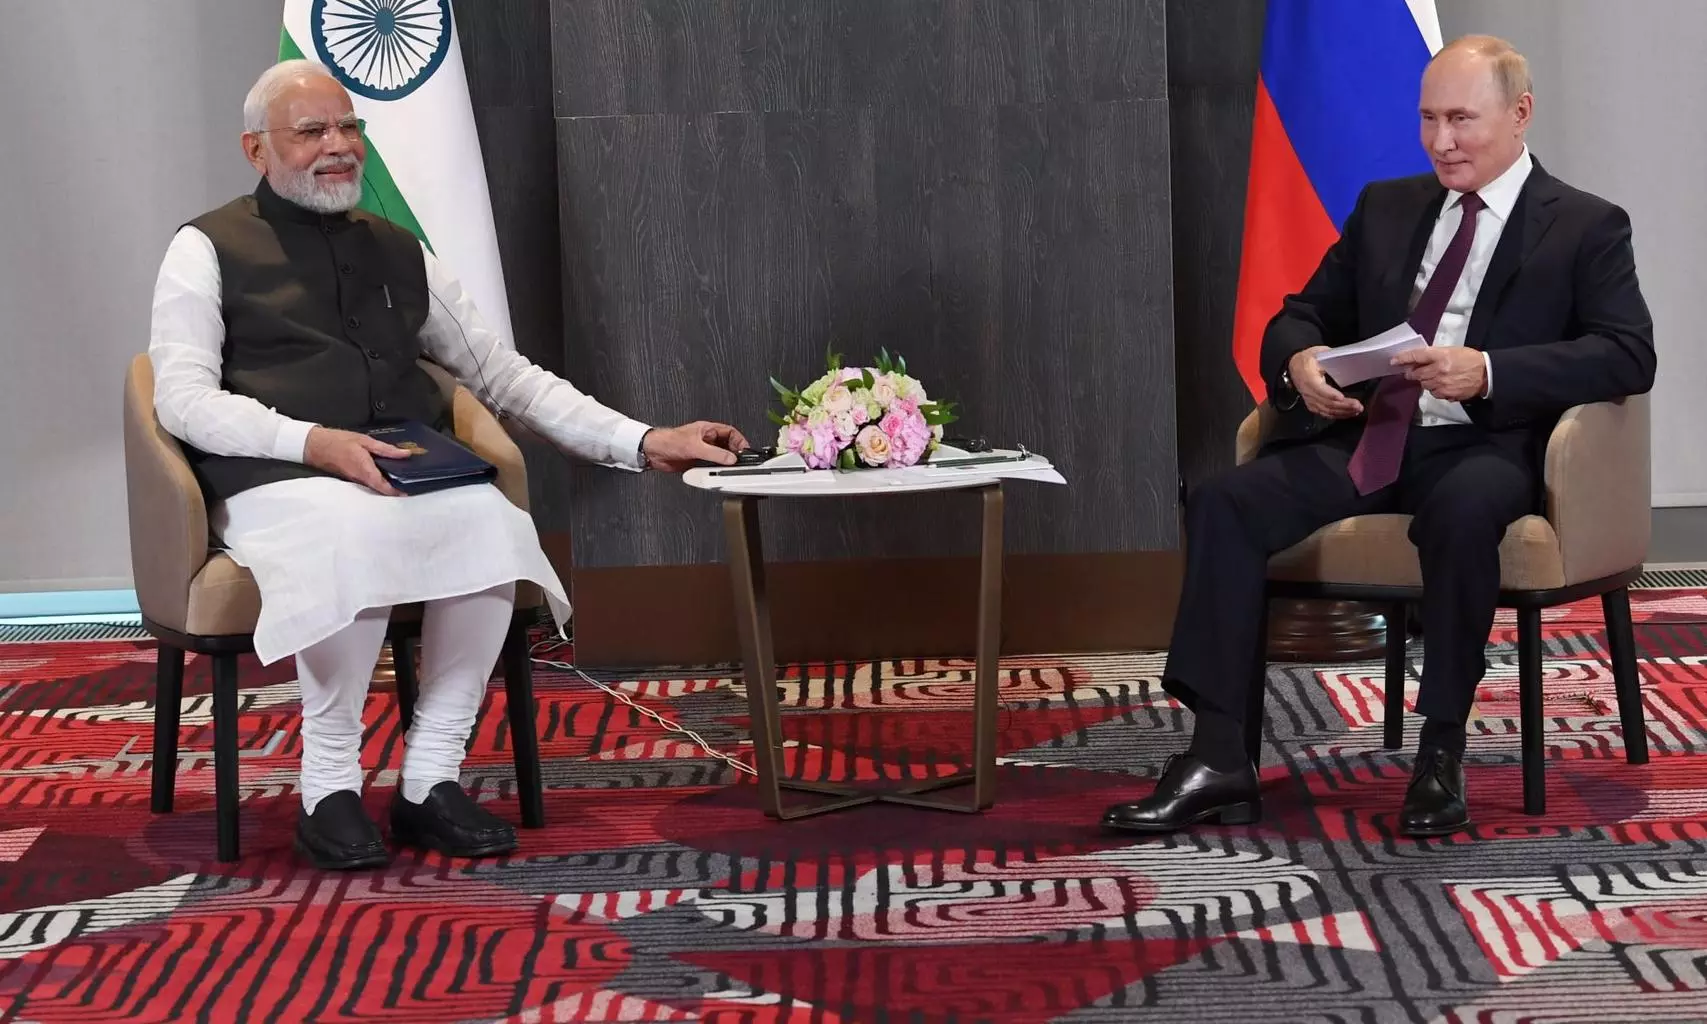 PM Modi greets Putin, suggests diplomacy to end Ukraine conflict